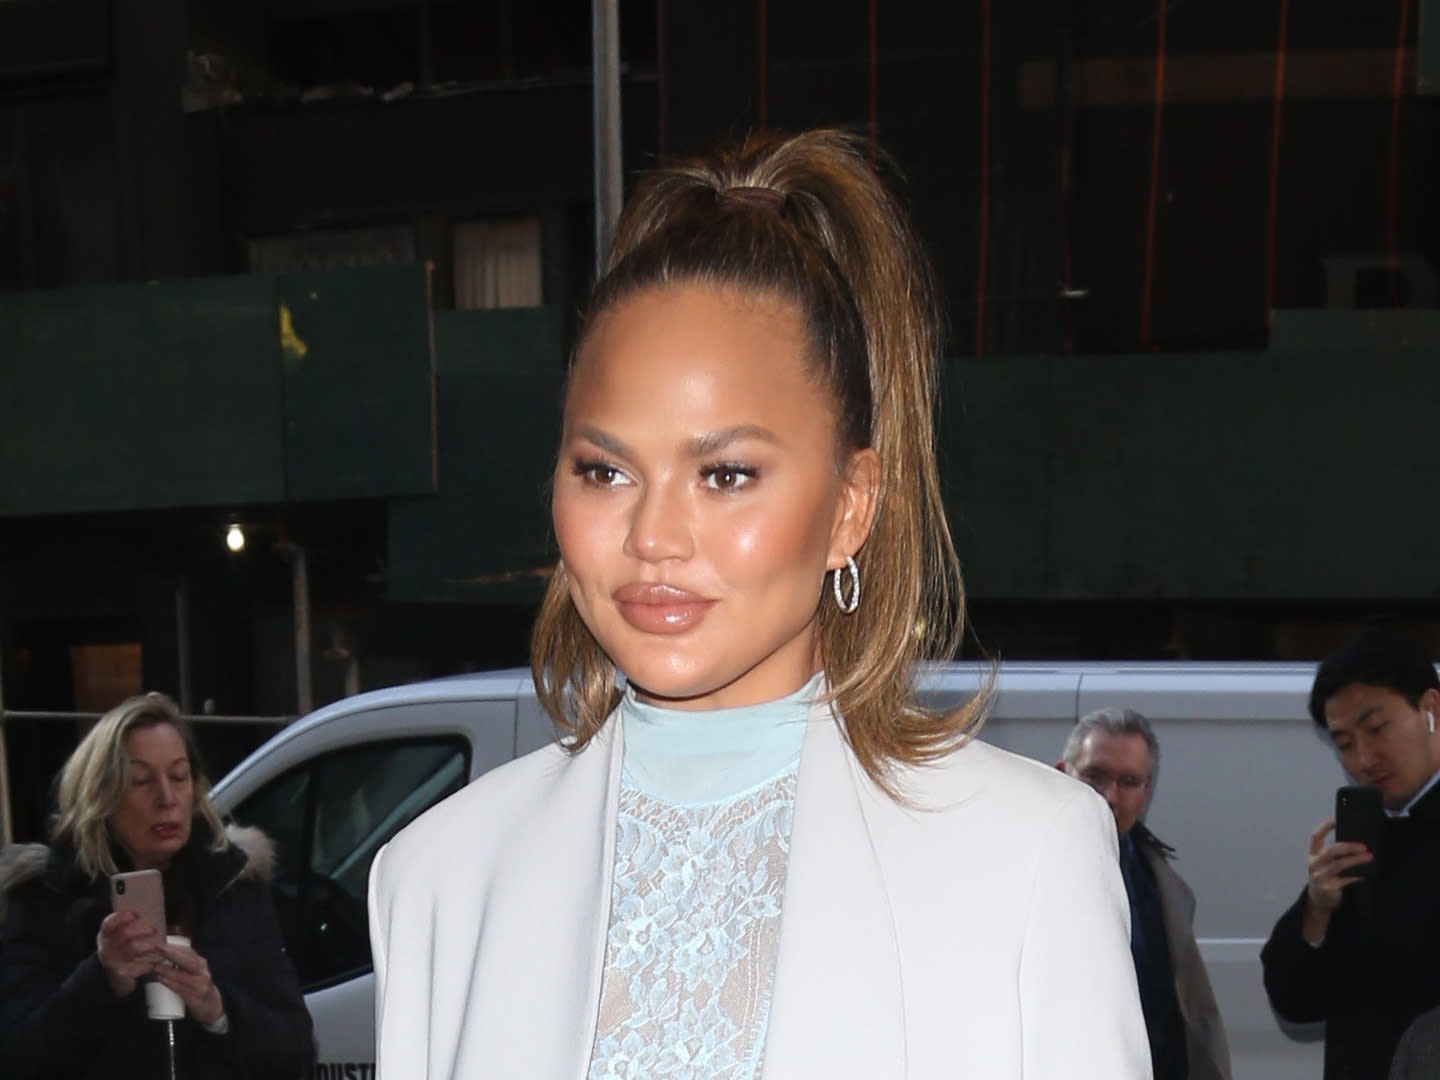 Chrissy Teigen says she replaced alcohol with another vice